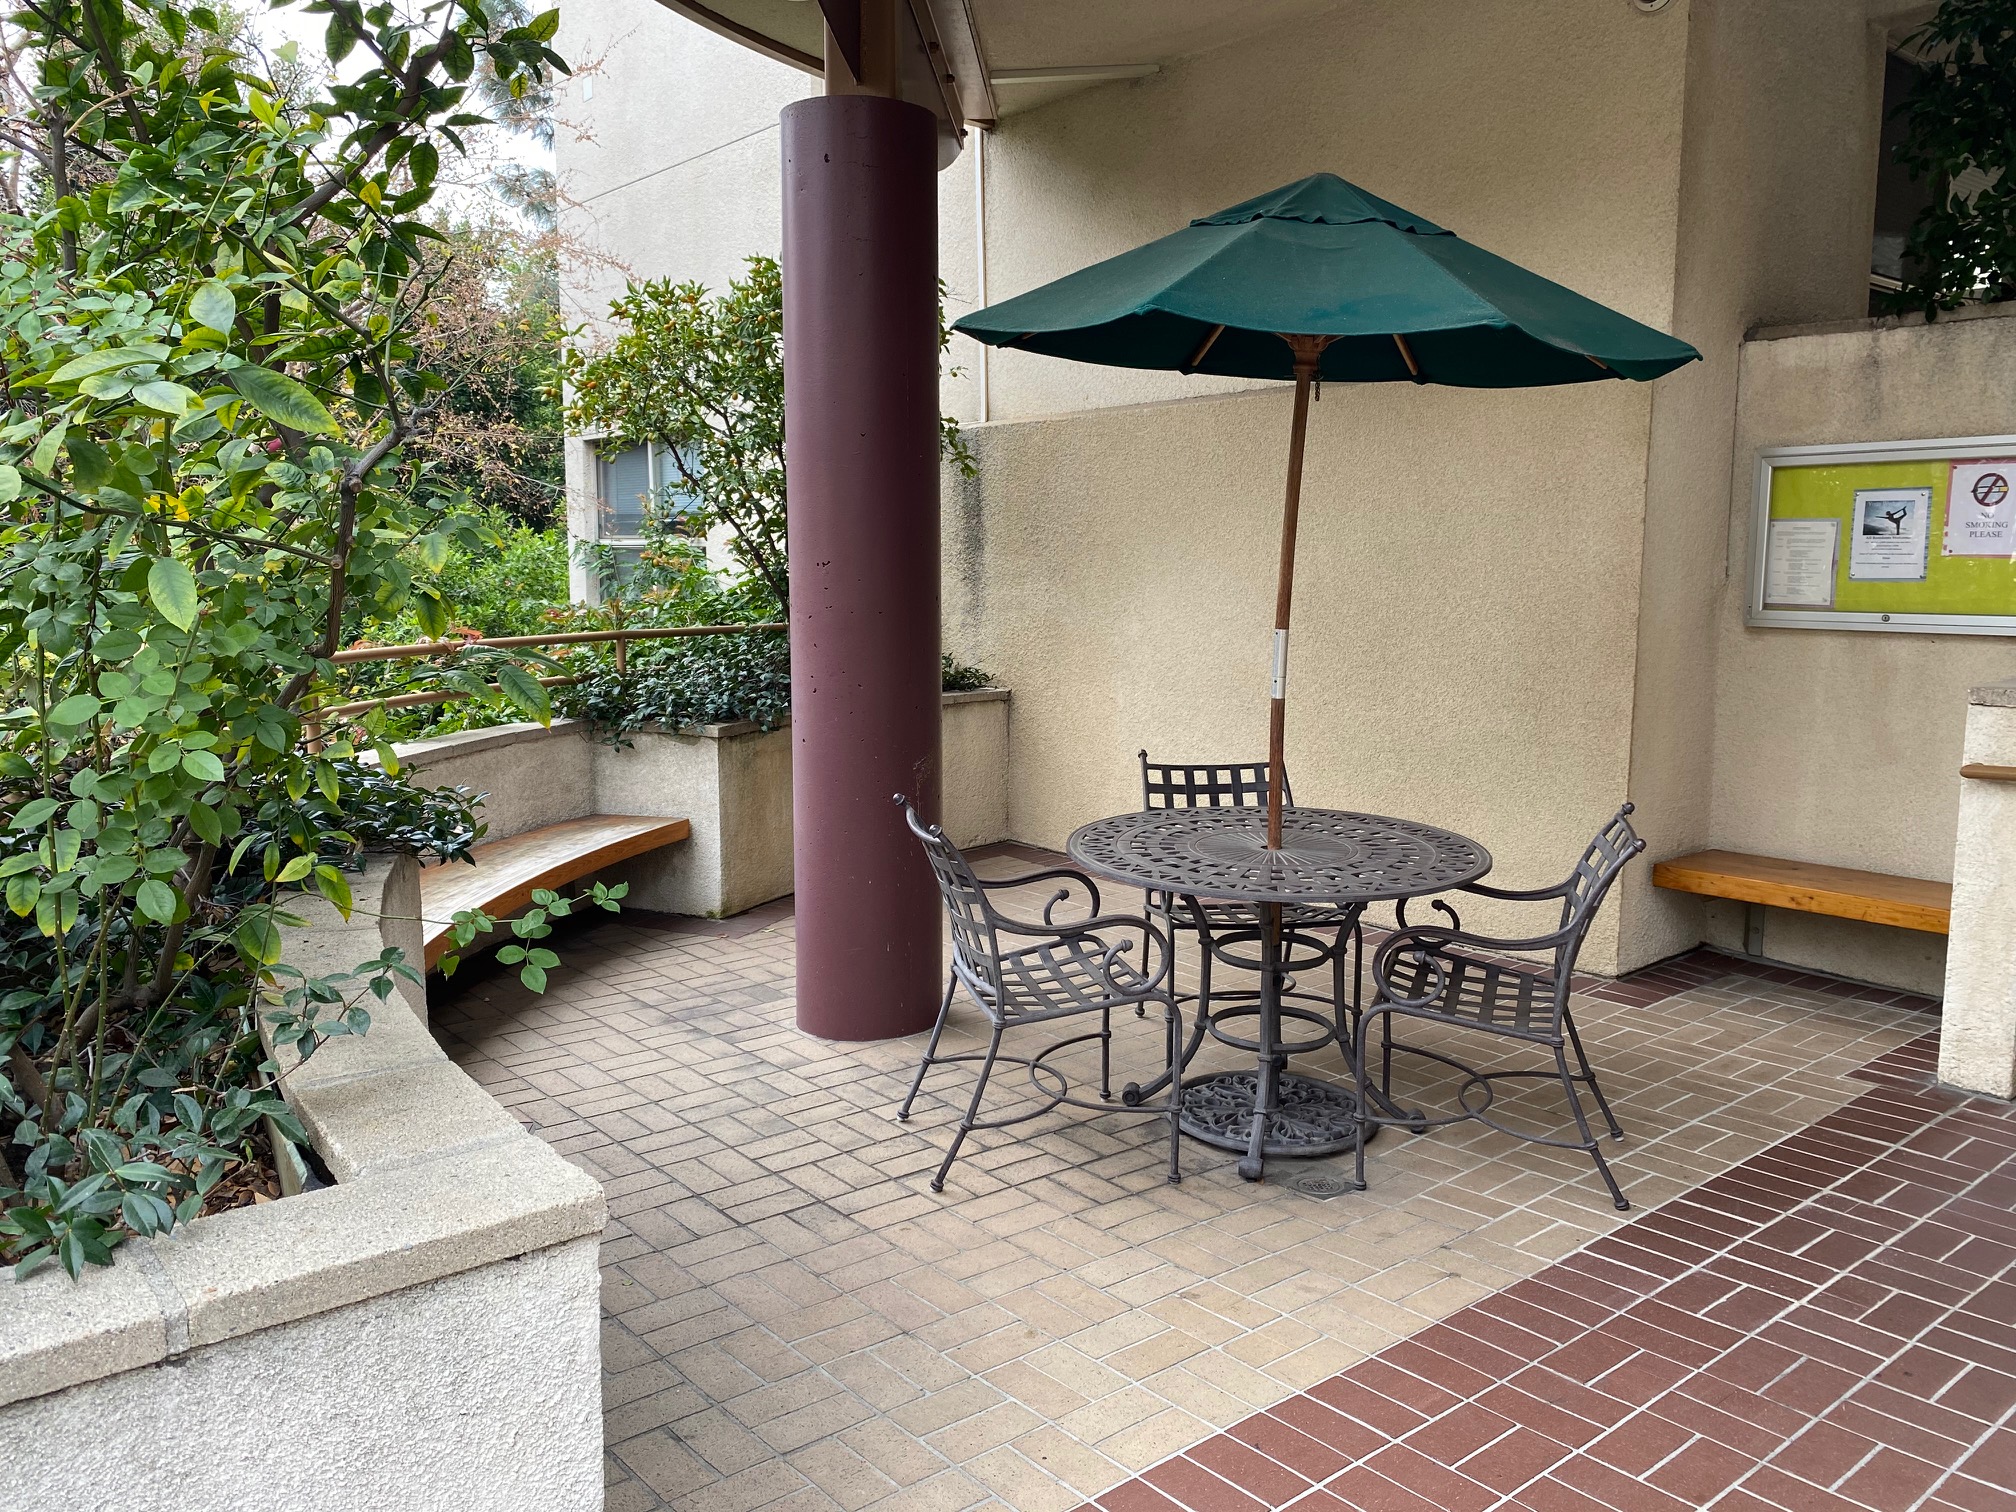 image of la brea franklin seating area. large curved planters with bench seating. in center is patio table and chairs with umbrella. Bulletin board on wall